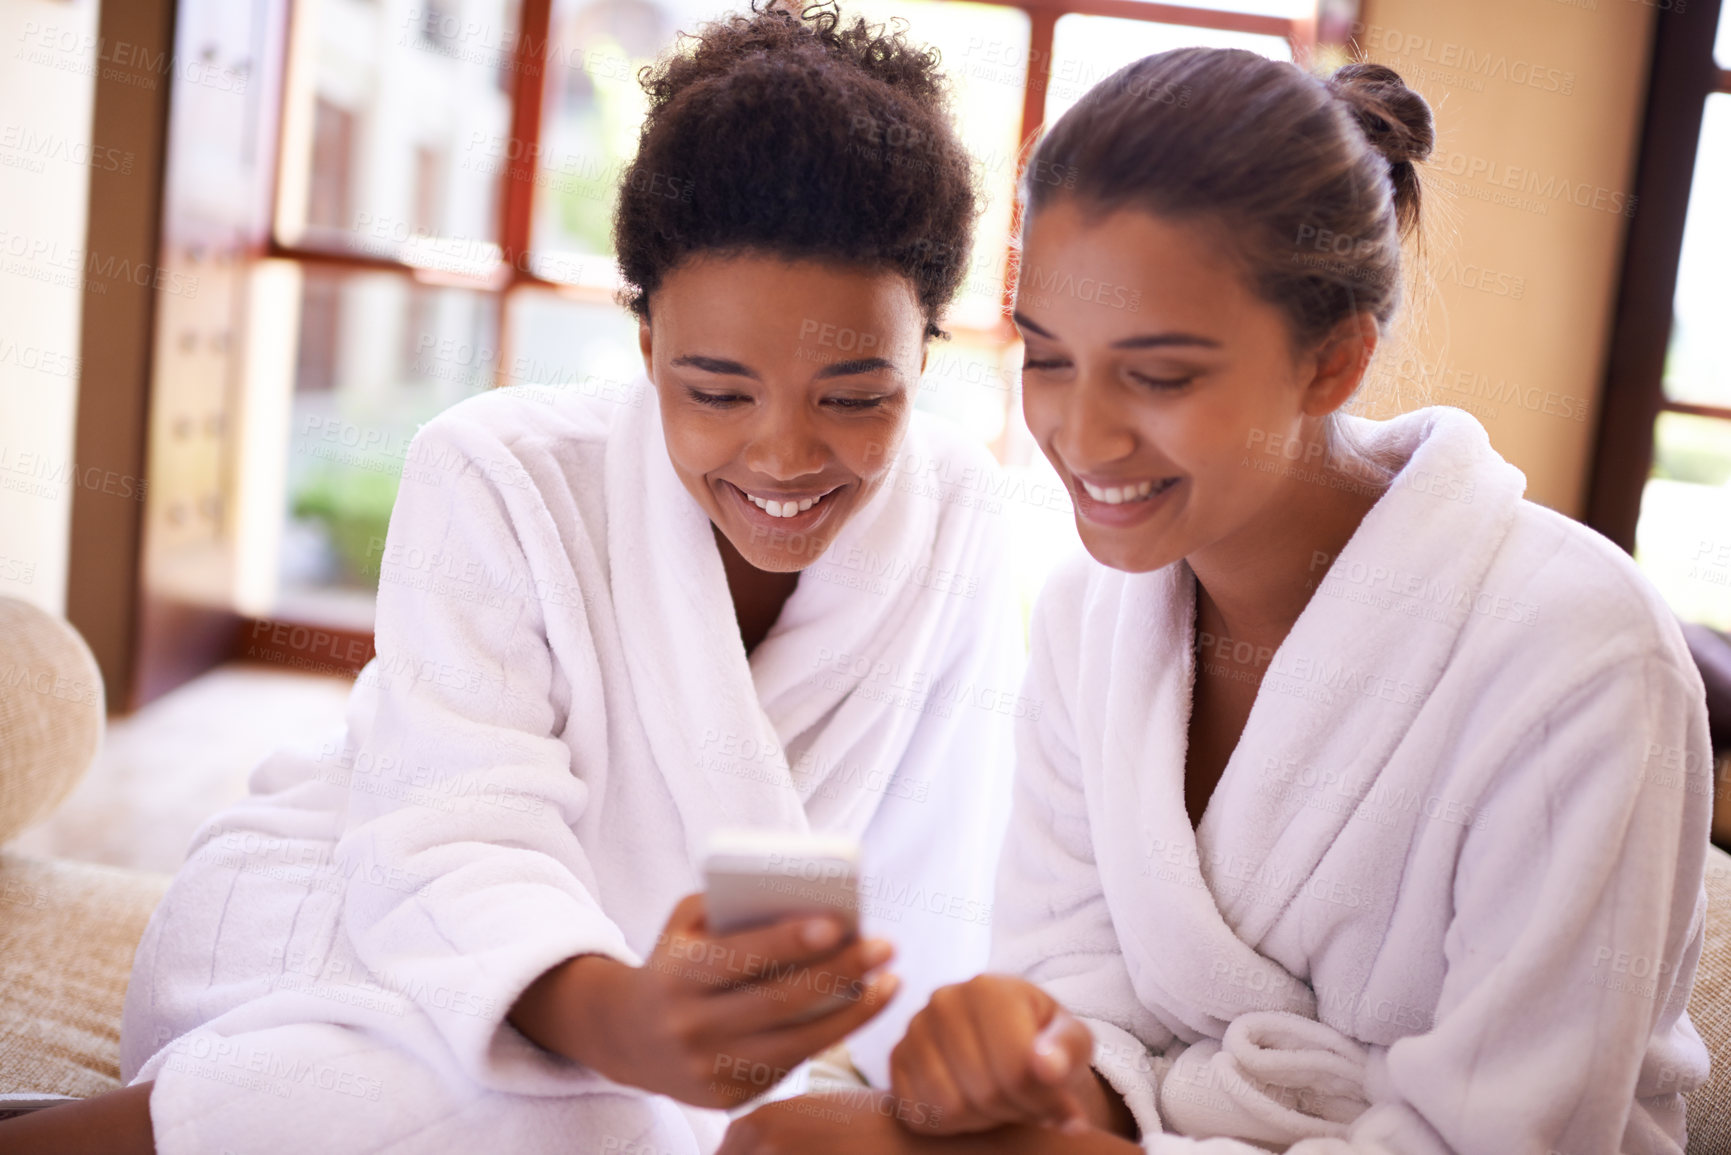 Buy stock photo Beauty, phone and spa with woman friends in robes for luxury pampering or treatment together. Smile, app and social media with happy young people at resort or salon for wellness or weekend getaway